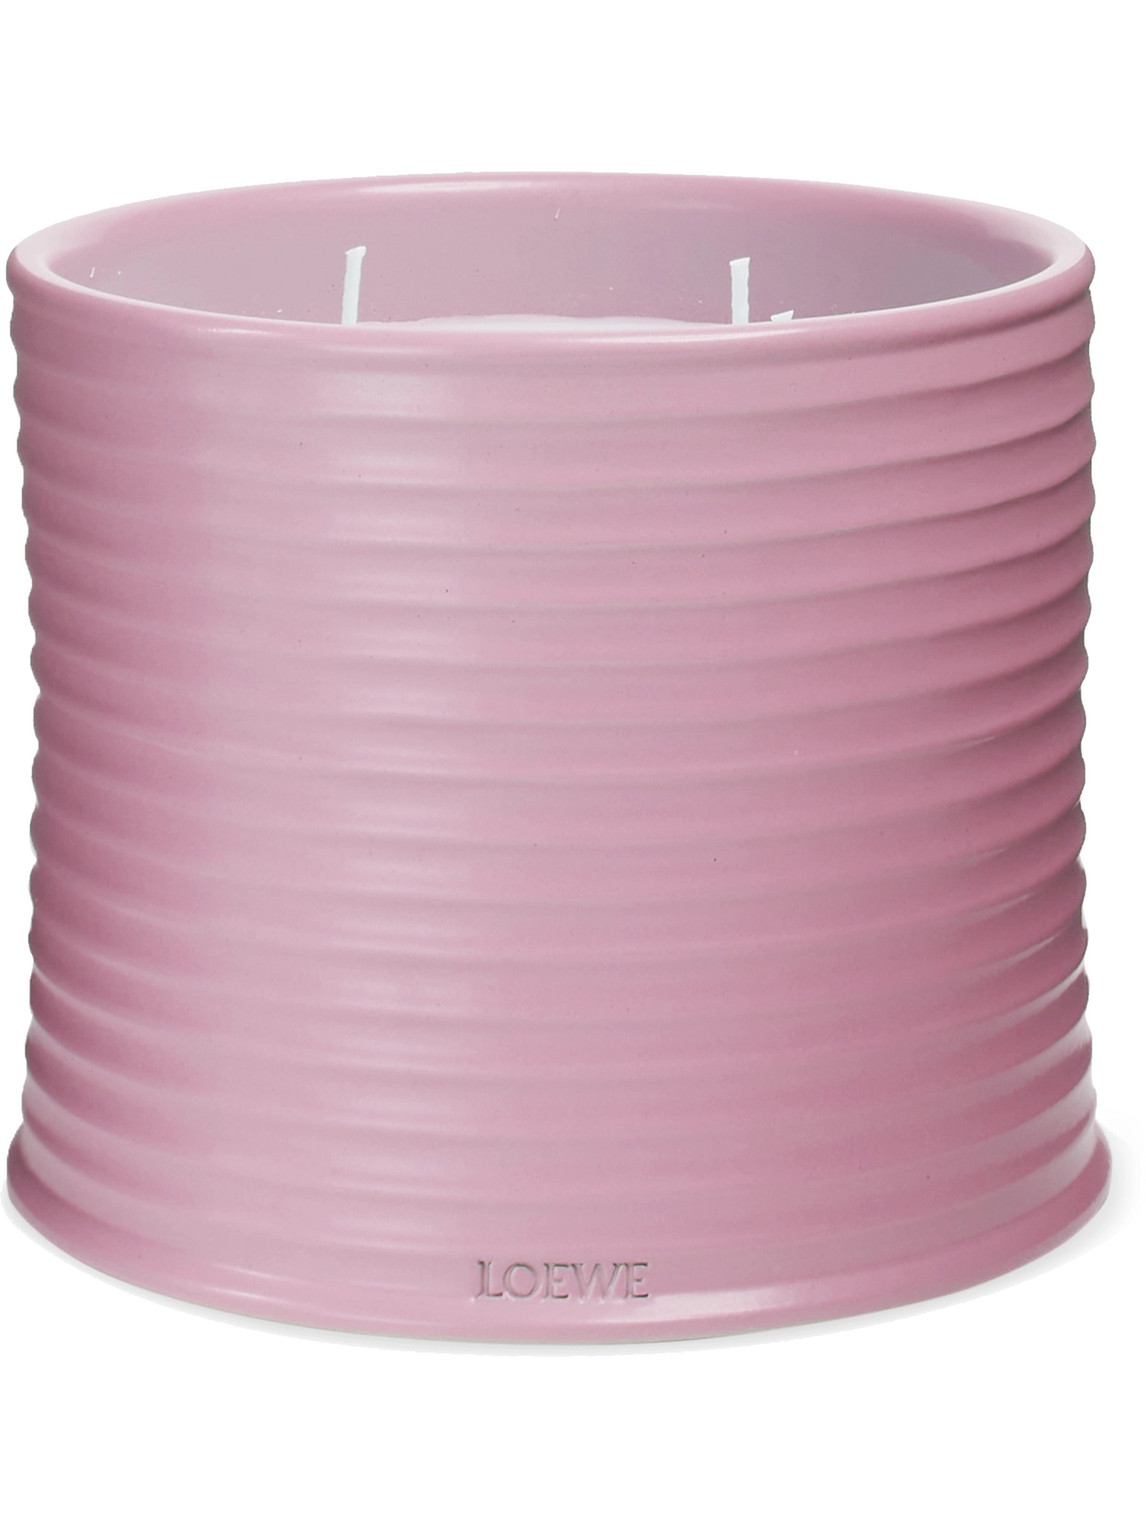 Loewe Home Scents Ivy Scented Candle, 2120g In Colorless